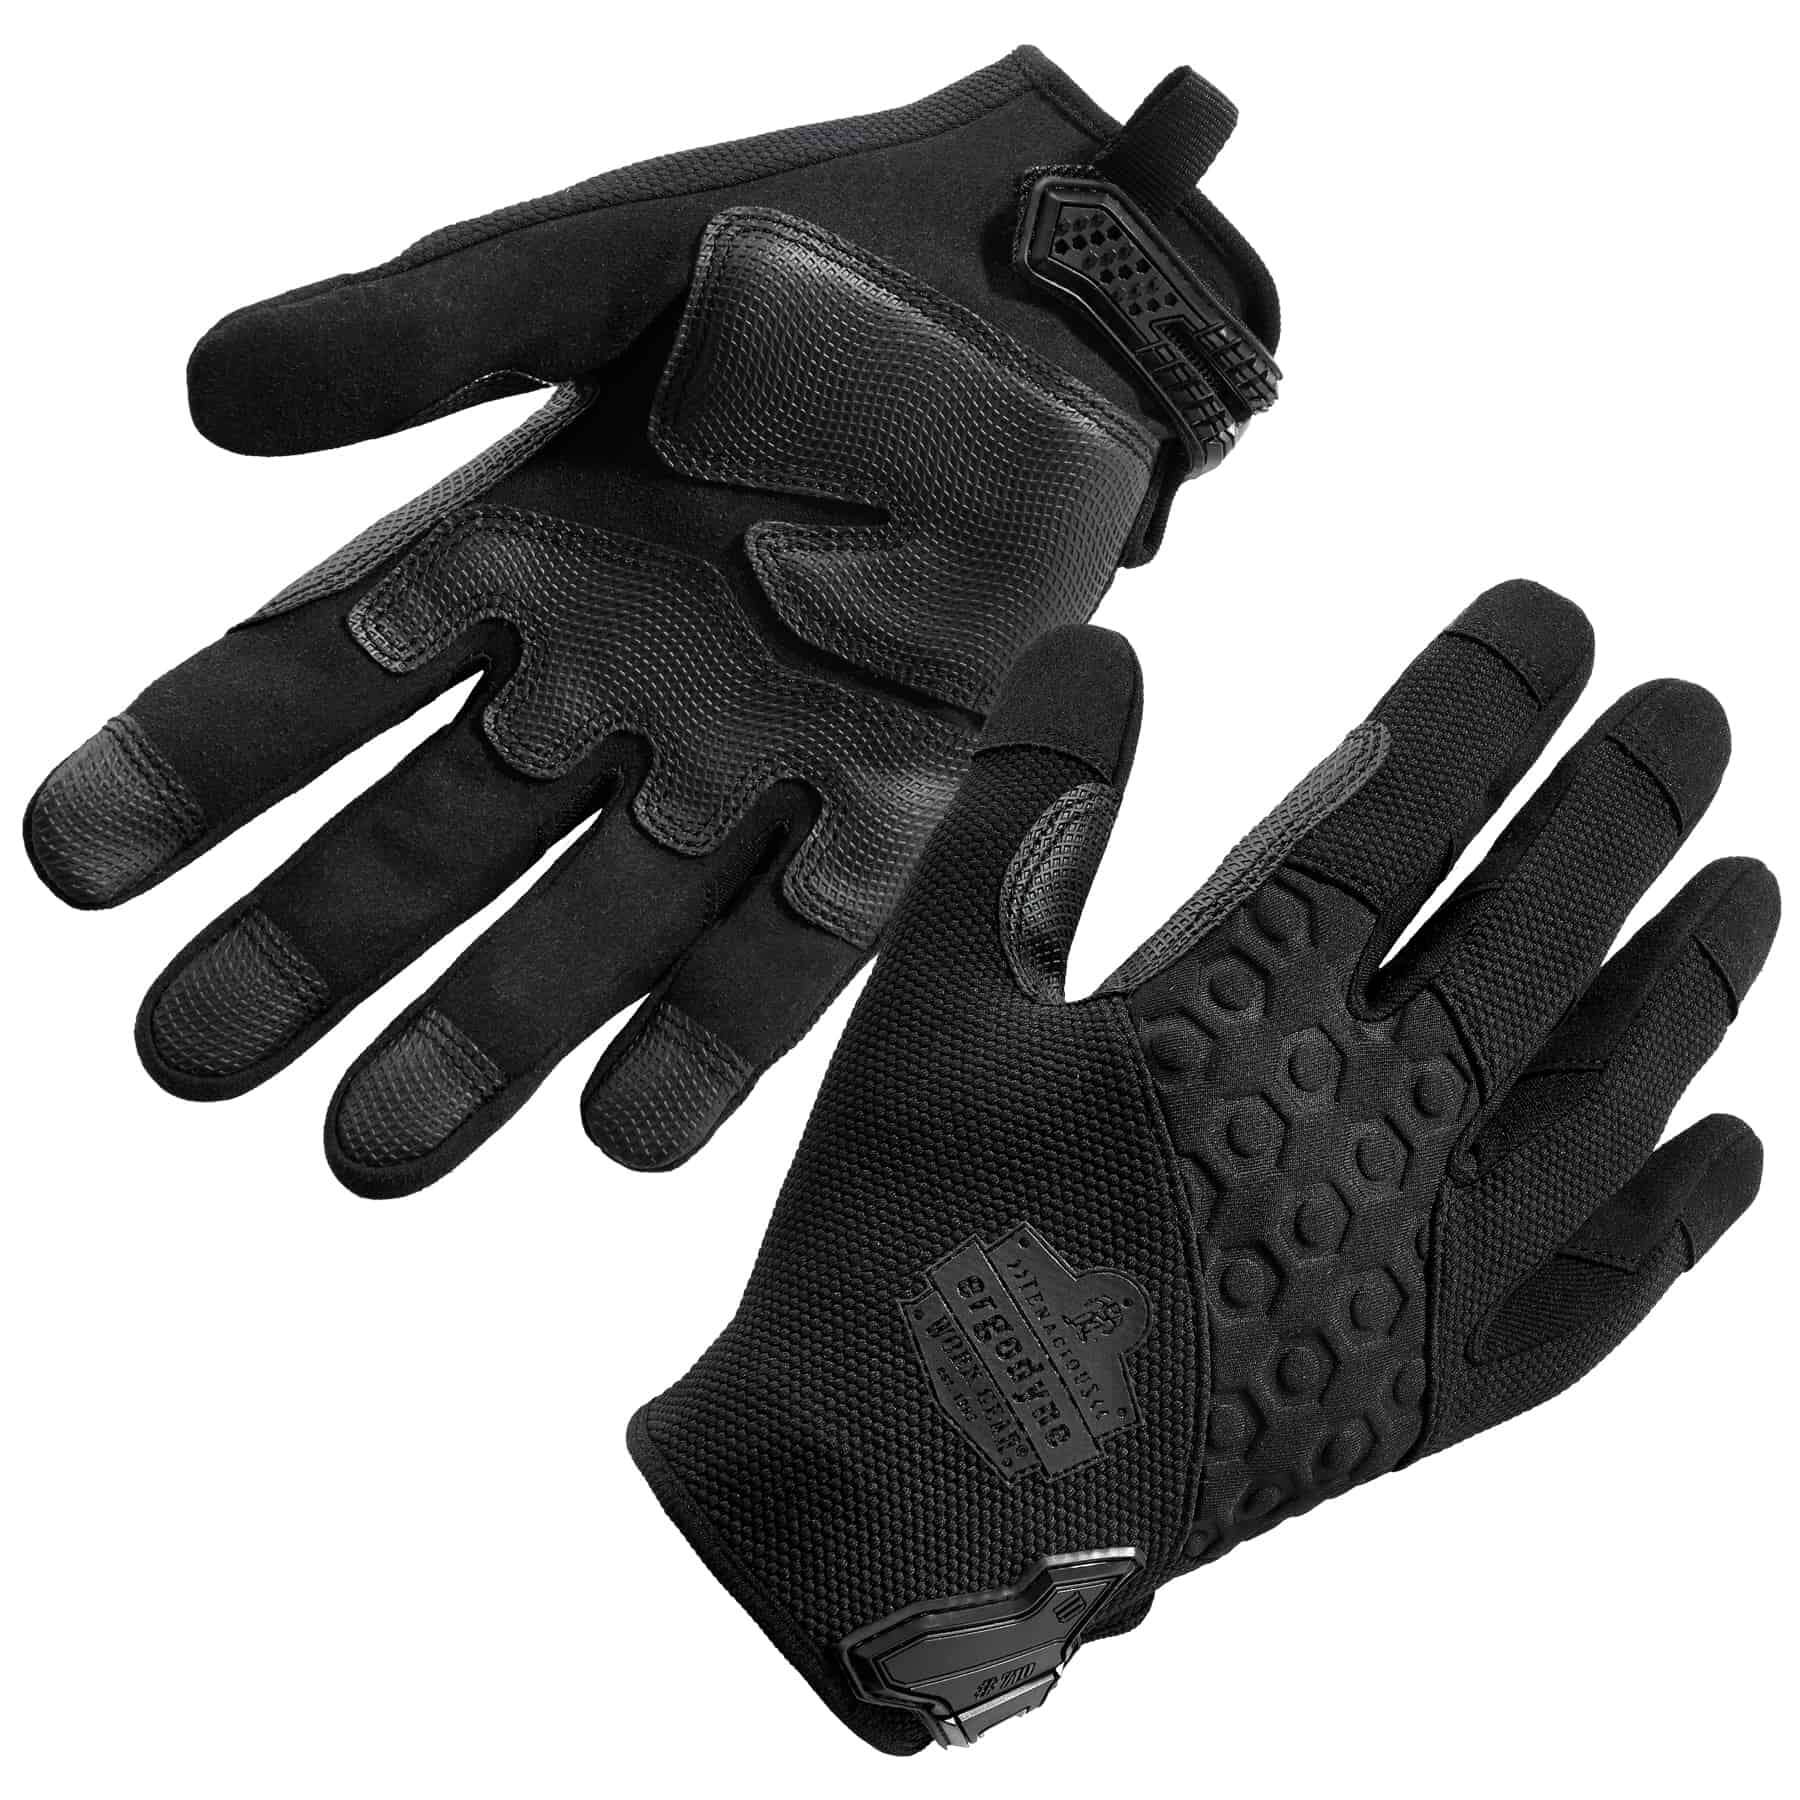 Men's Tactical Police Military Mechanic Strong Grip Textured Neoprene Gloves》L 